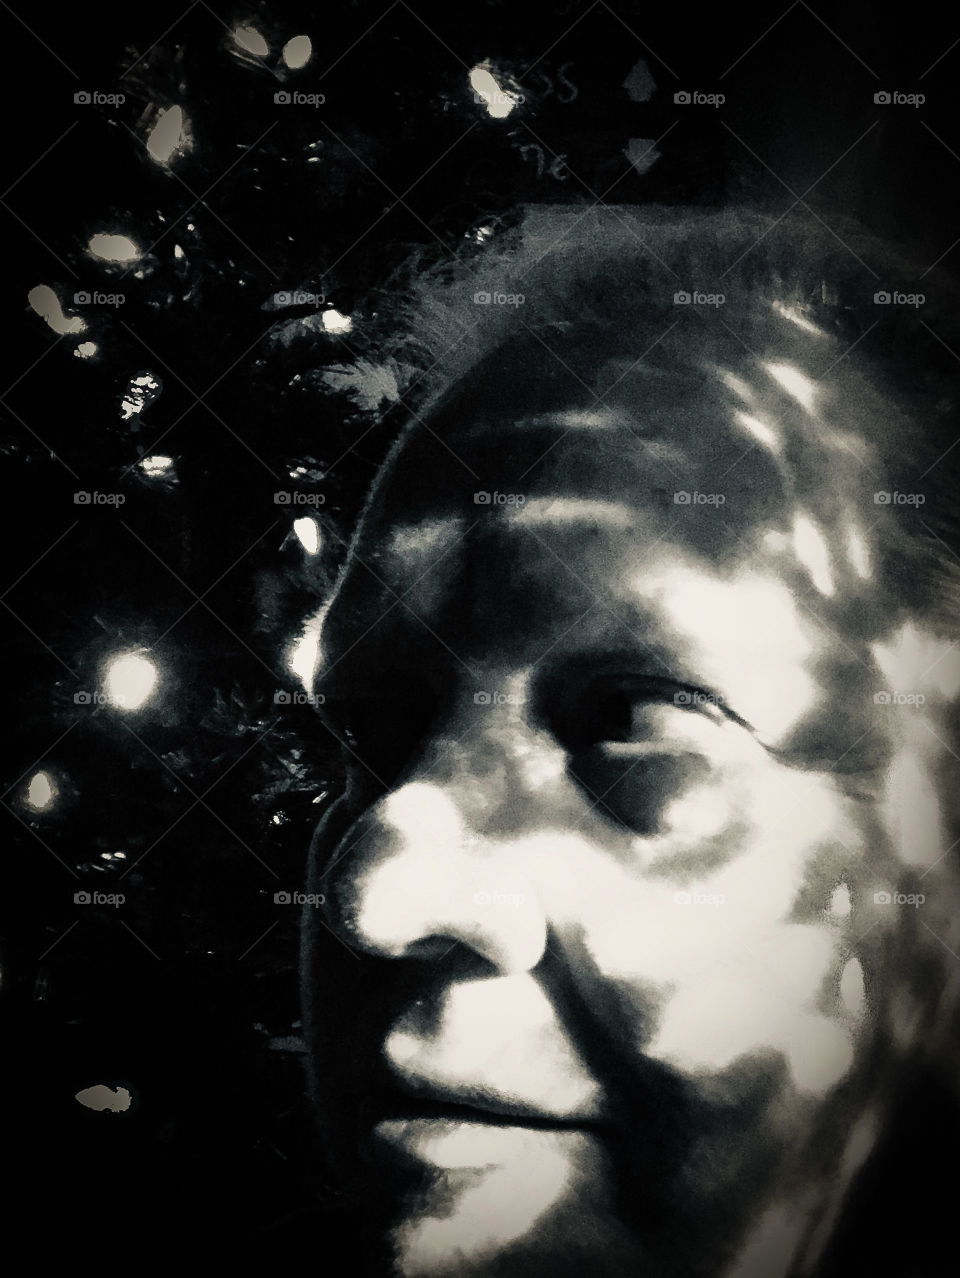 Experimenting with my kaleidoscope Christmas lights in monochrome. Fun, but super creepy!